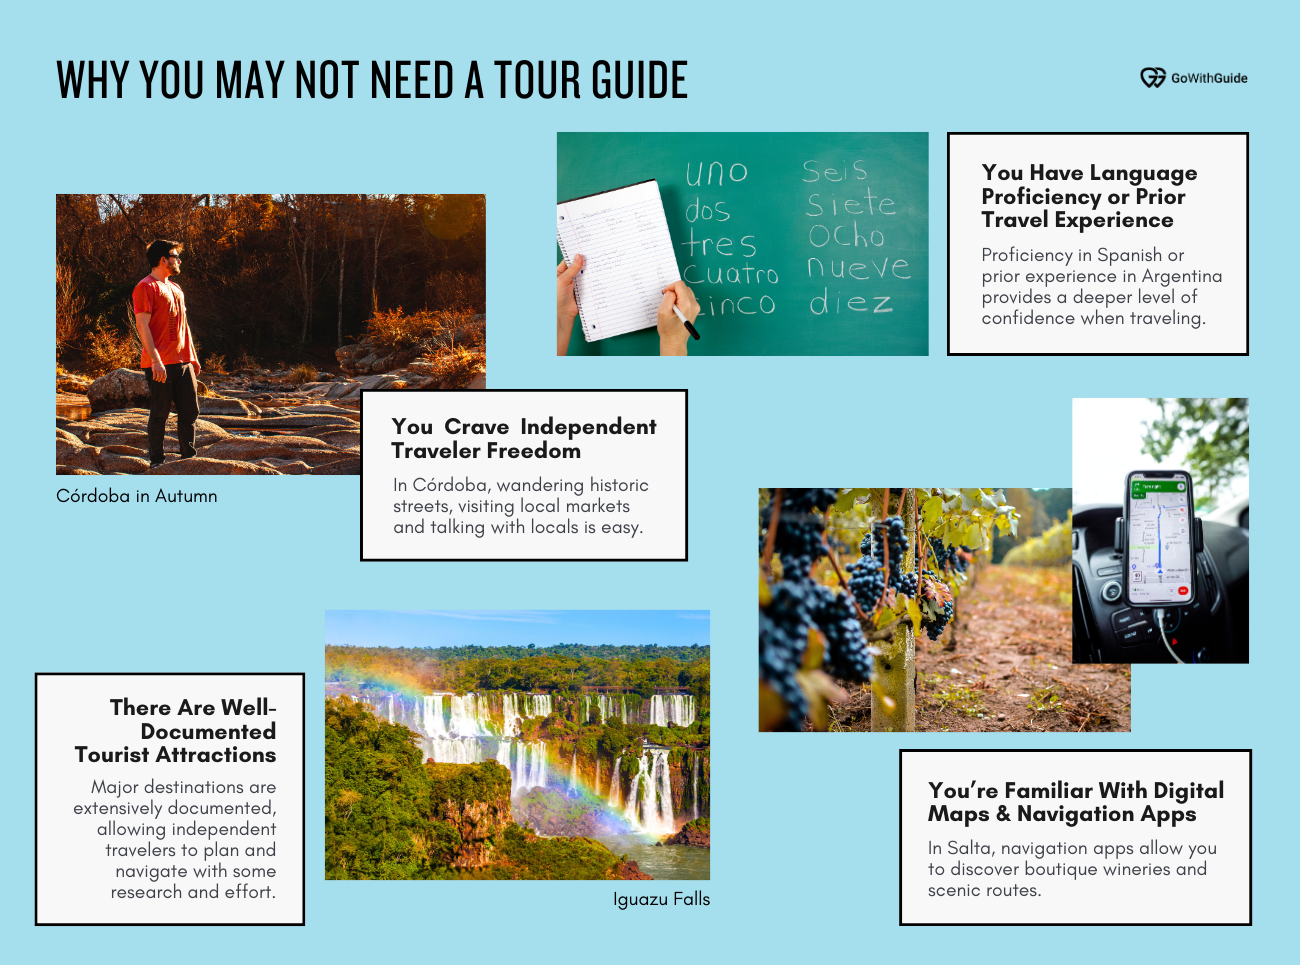 An infographic with 4 text groups, each demonstrating the reasons why you may not ned a tour guide in Argentina, alongside 4 relevant images for each text summary. 